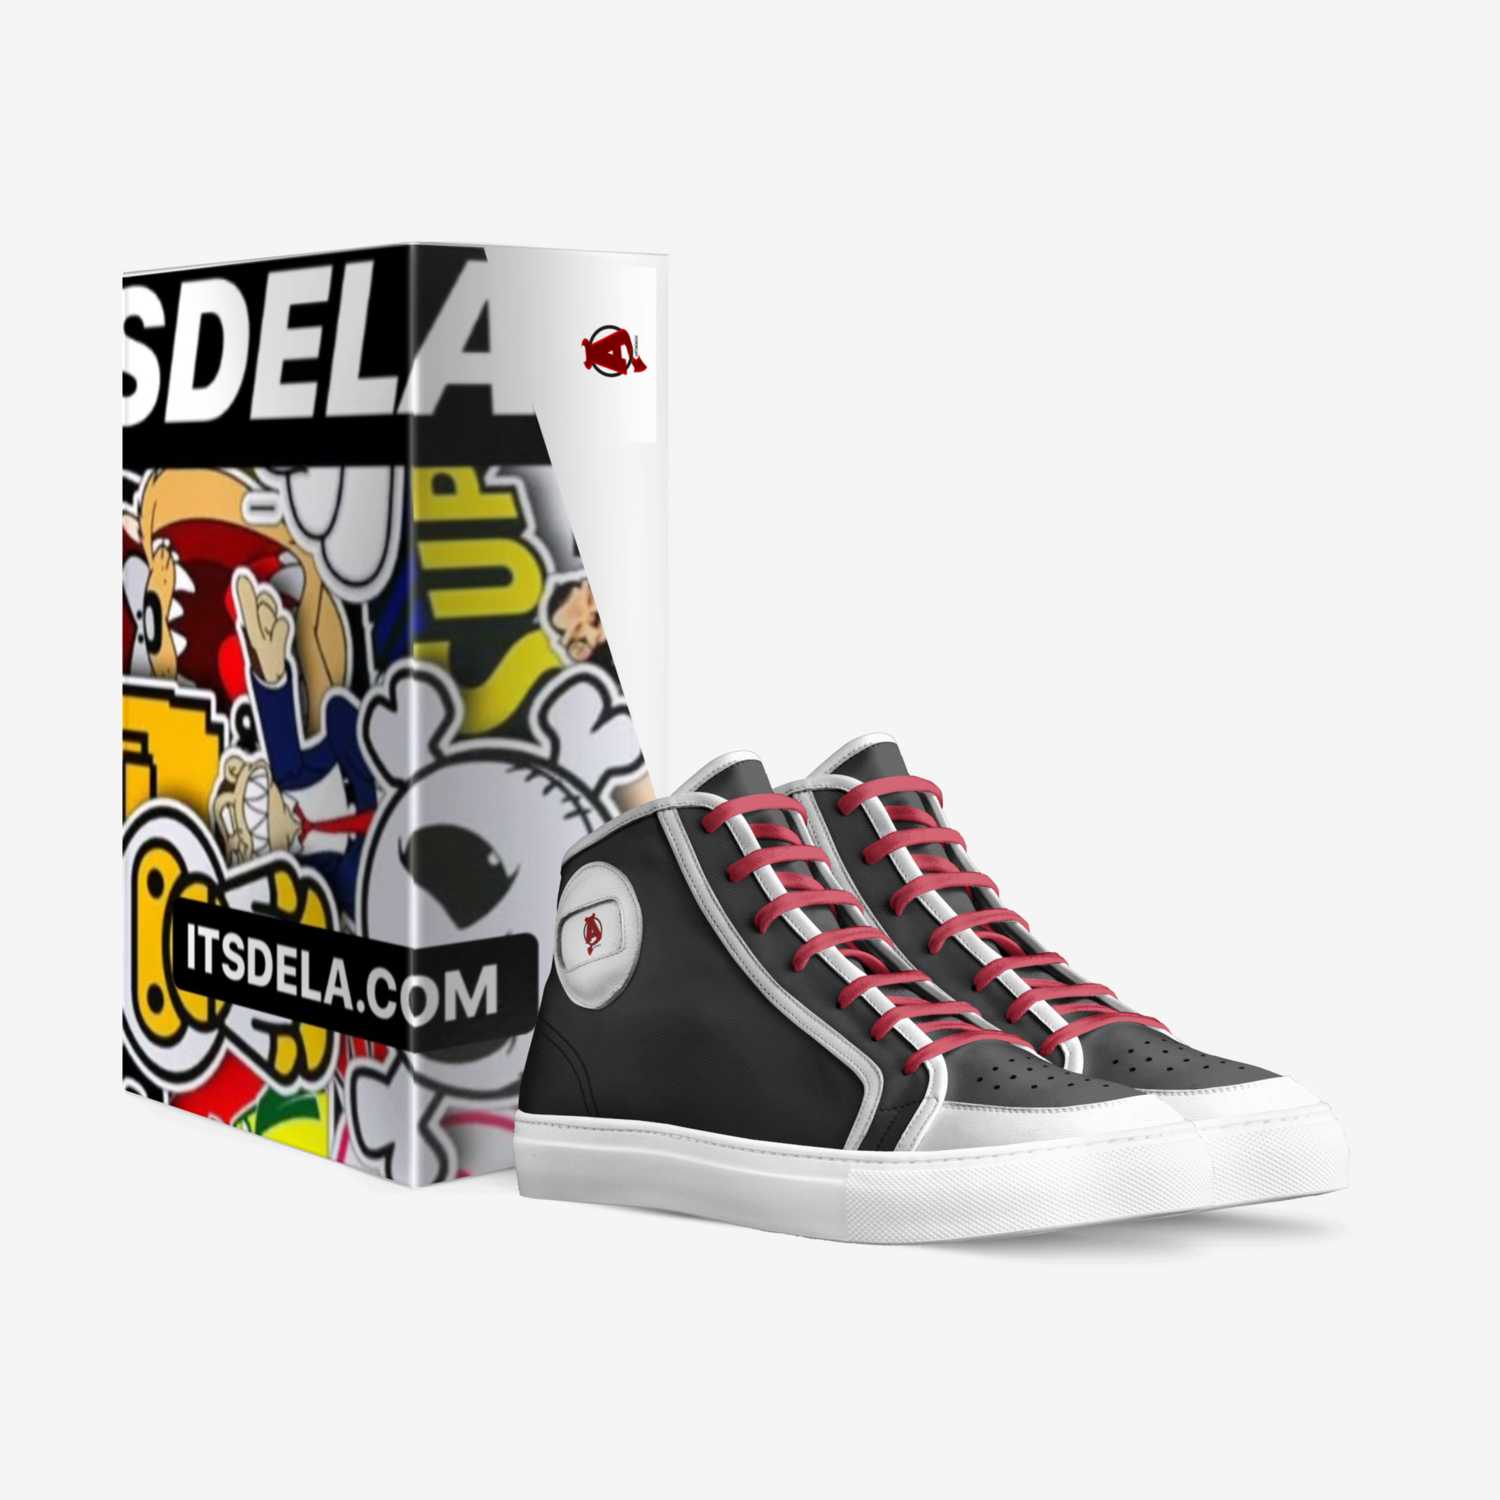 2:22 PM custom made in Italy shoes by Dela Jazz2kool | Box view